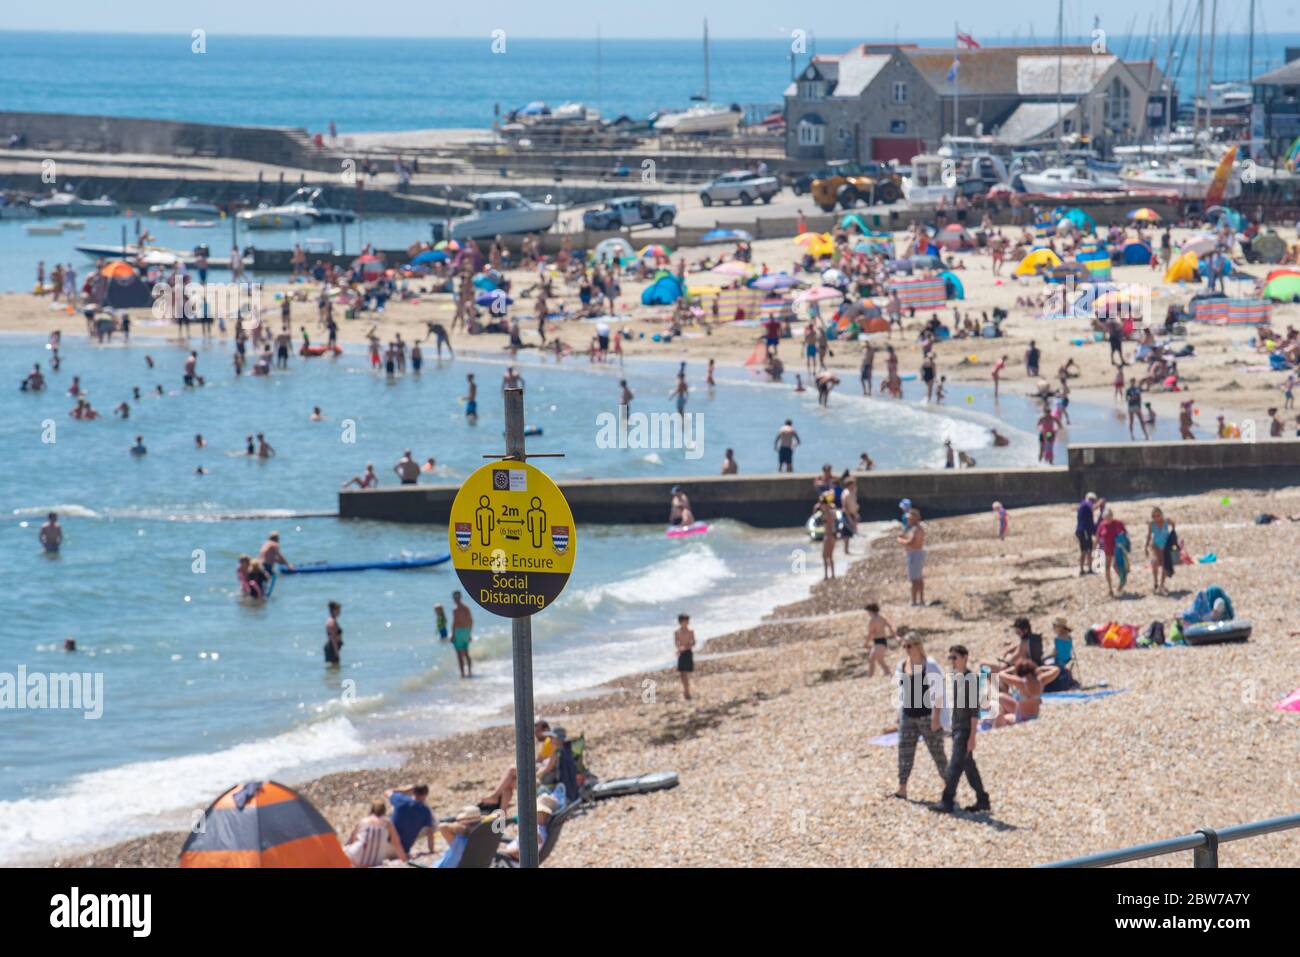 Lyme Regis, Dorset, UK. 30th May 2020. UK Weather. Social distancing reminder signs at Lyme Regis where beachgoers and families packed the beach this afternoon to bask in the hot afternoon sunshine on the hottest day of the year. Credit: Celia McMahon/Alamy Live News. Stock Photo